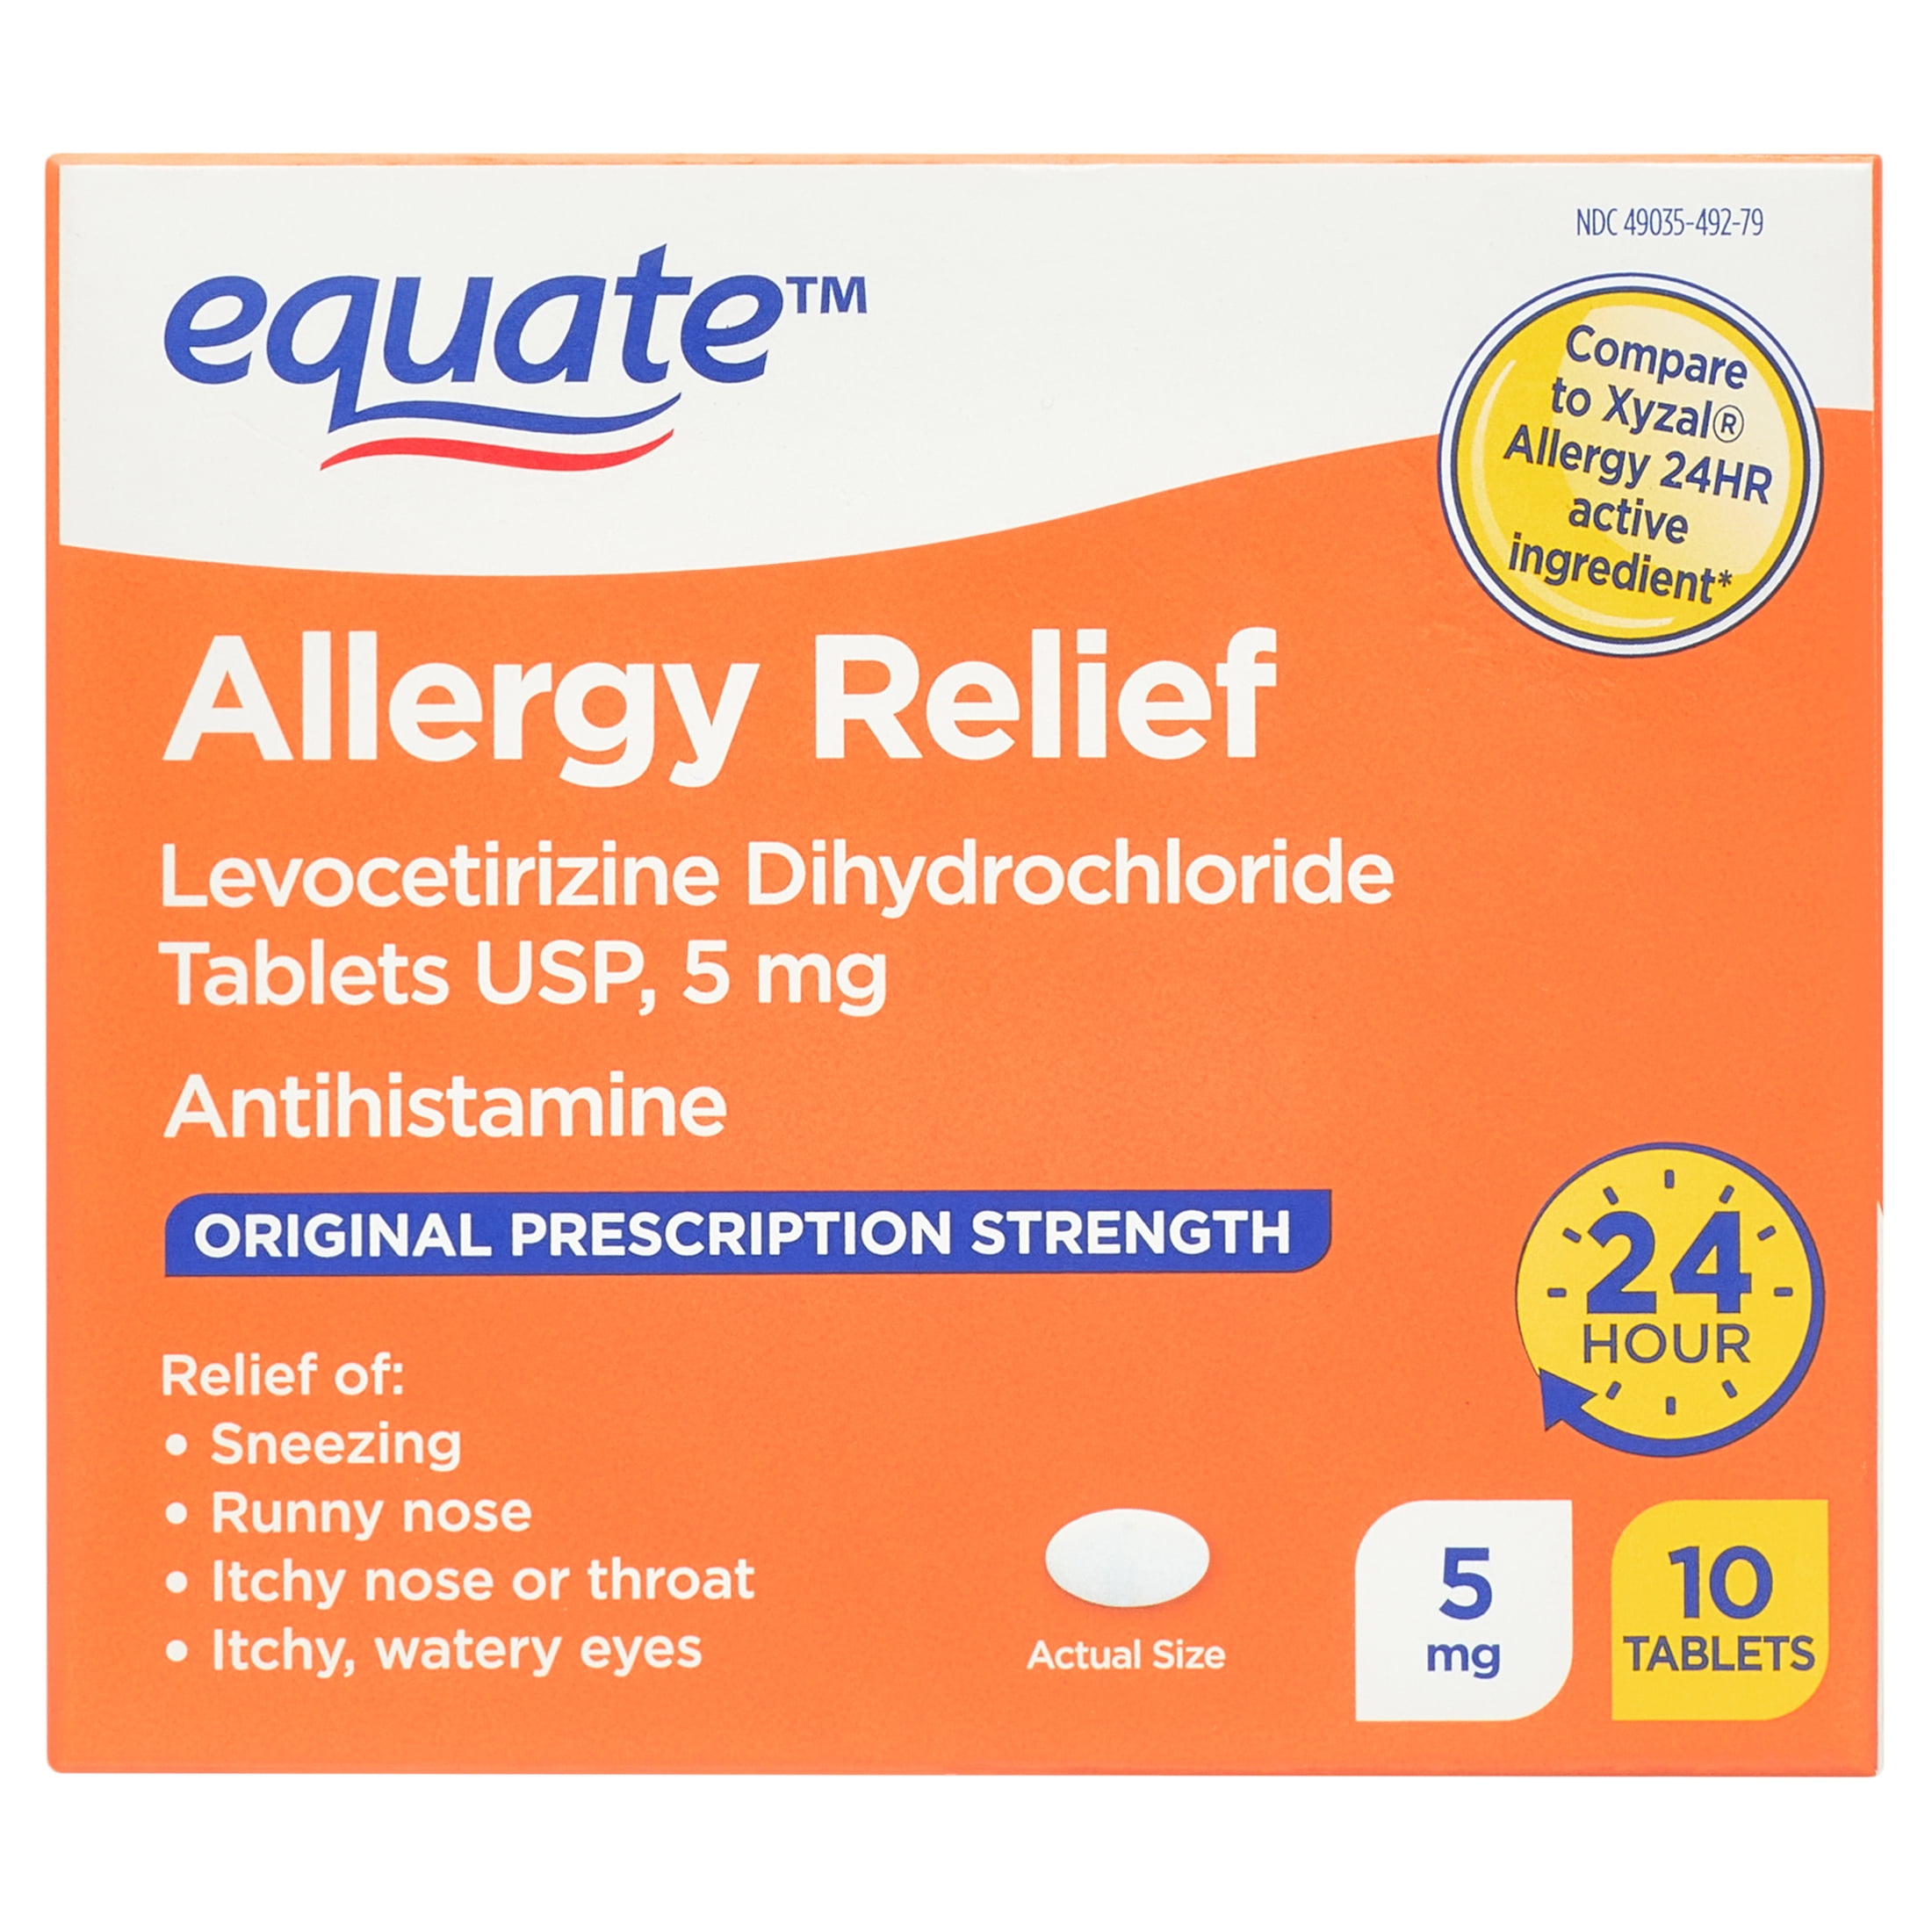 Equate Levocetirizine Dihydrochloride USP Allergy Relief Tablets, 5 mg, 10 Count